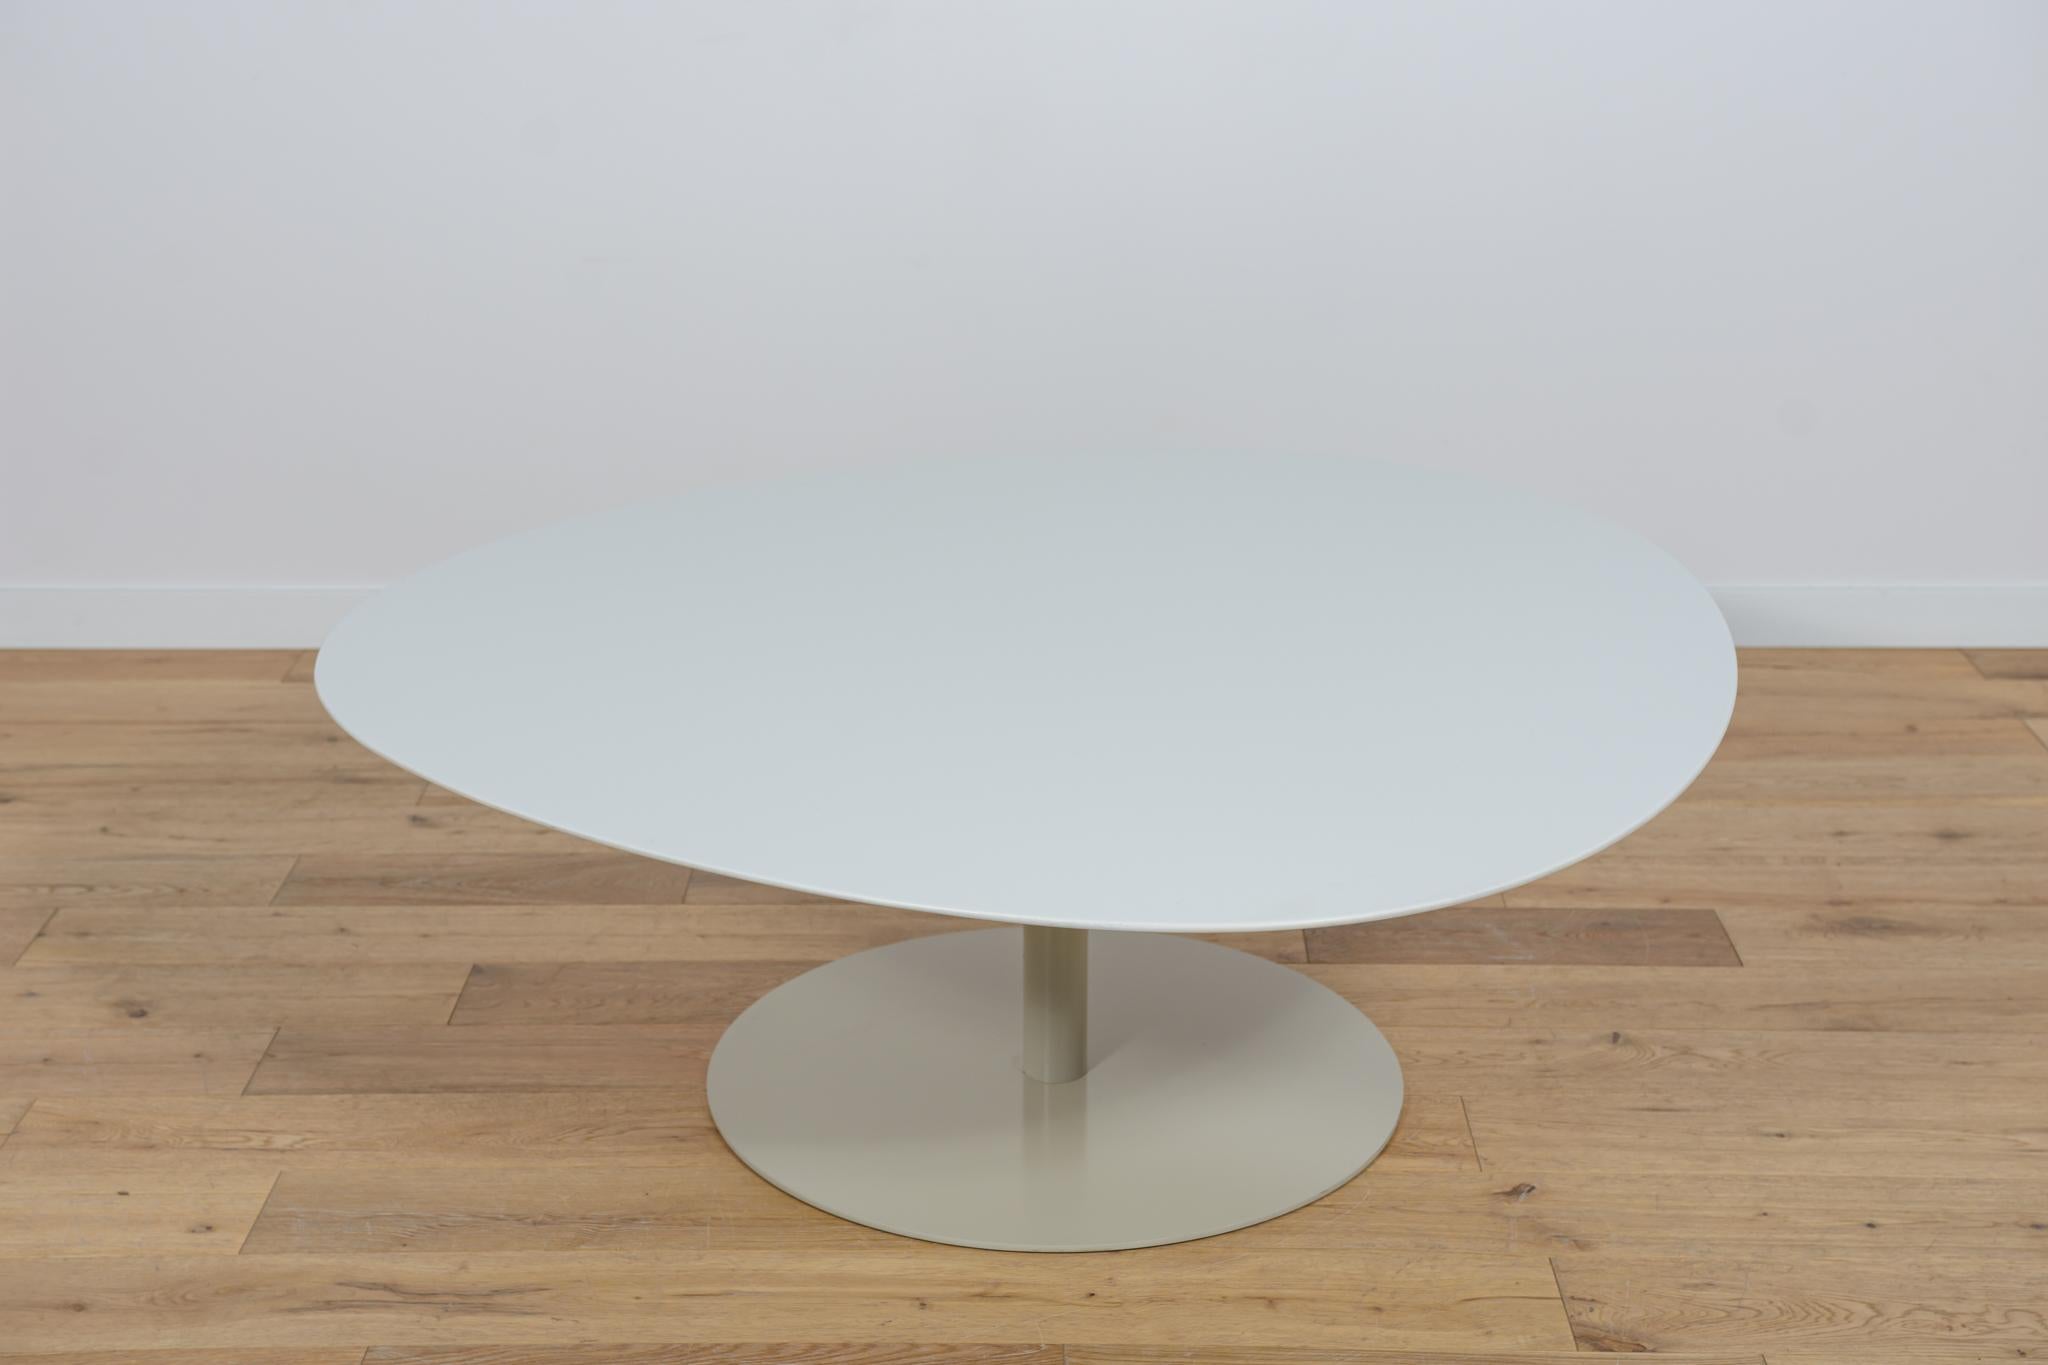 The MV50 table designed by Morten Voss for the Danish manufacturer Fritz Hansen in the first decade of the 21st century. Furniture with an interesting modernist form.  The MV50 table has been renovated, cleaned of the old surface and repainted.